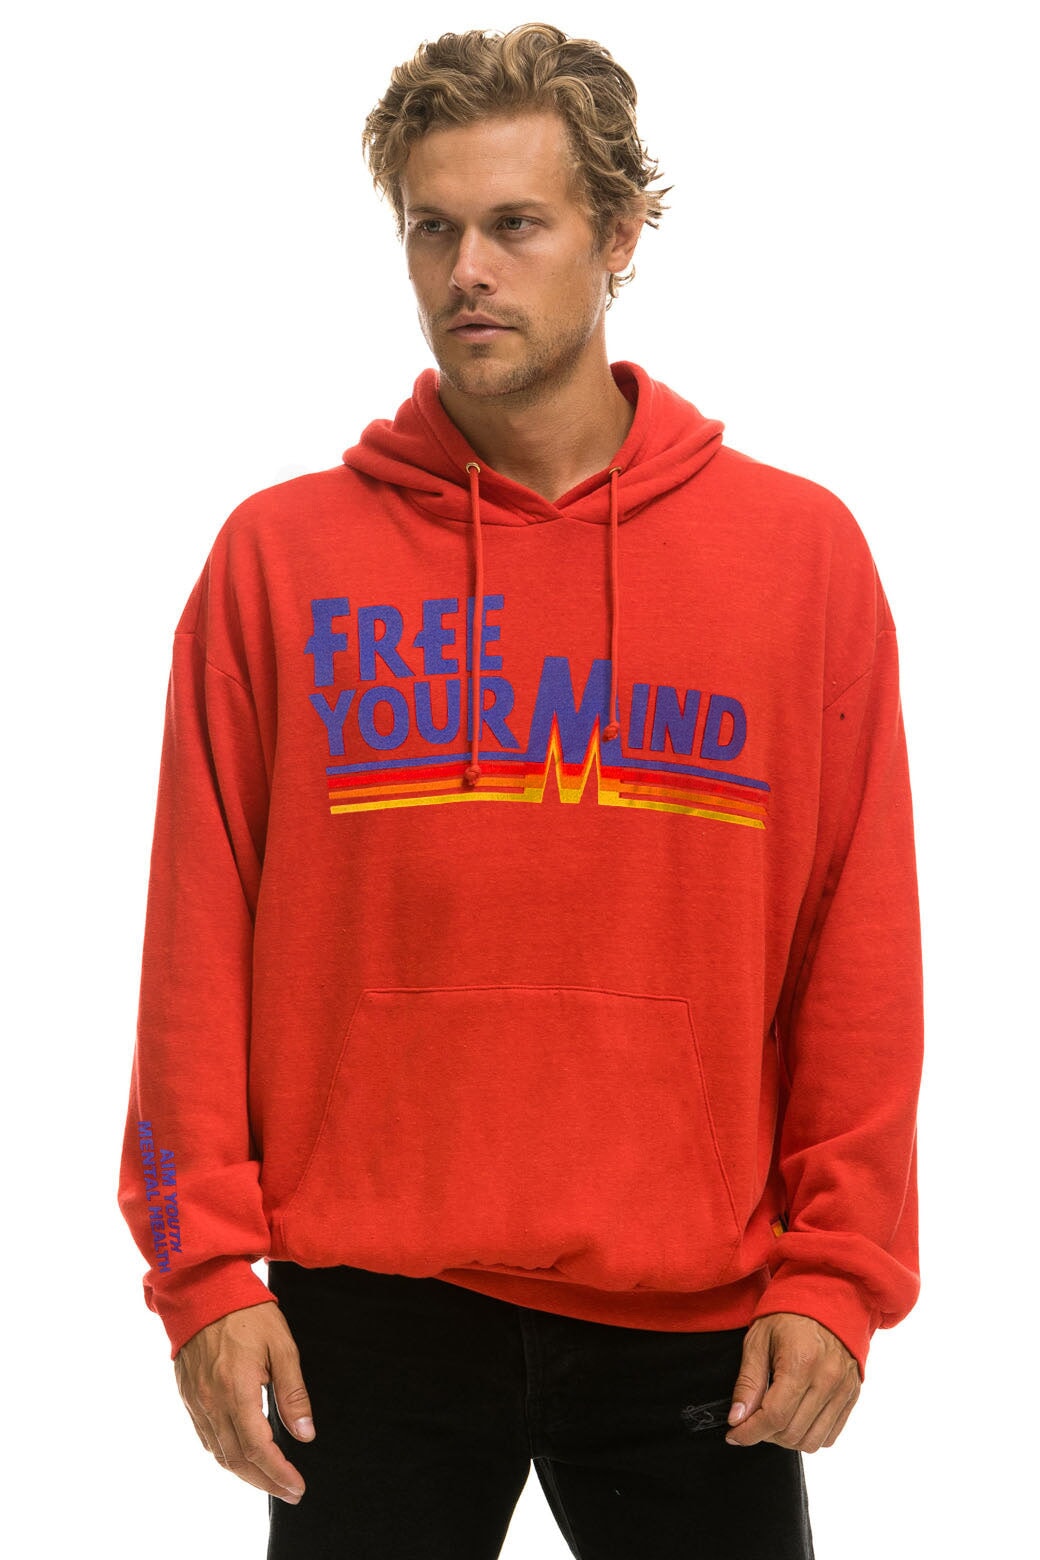 AVIATOR NATION + AIM YOUTH MENTAL HEALTH RELAXED PULLOVER HOODIE - RED Hoodie Aviator Nation 